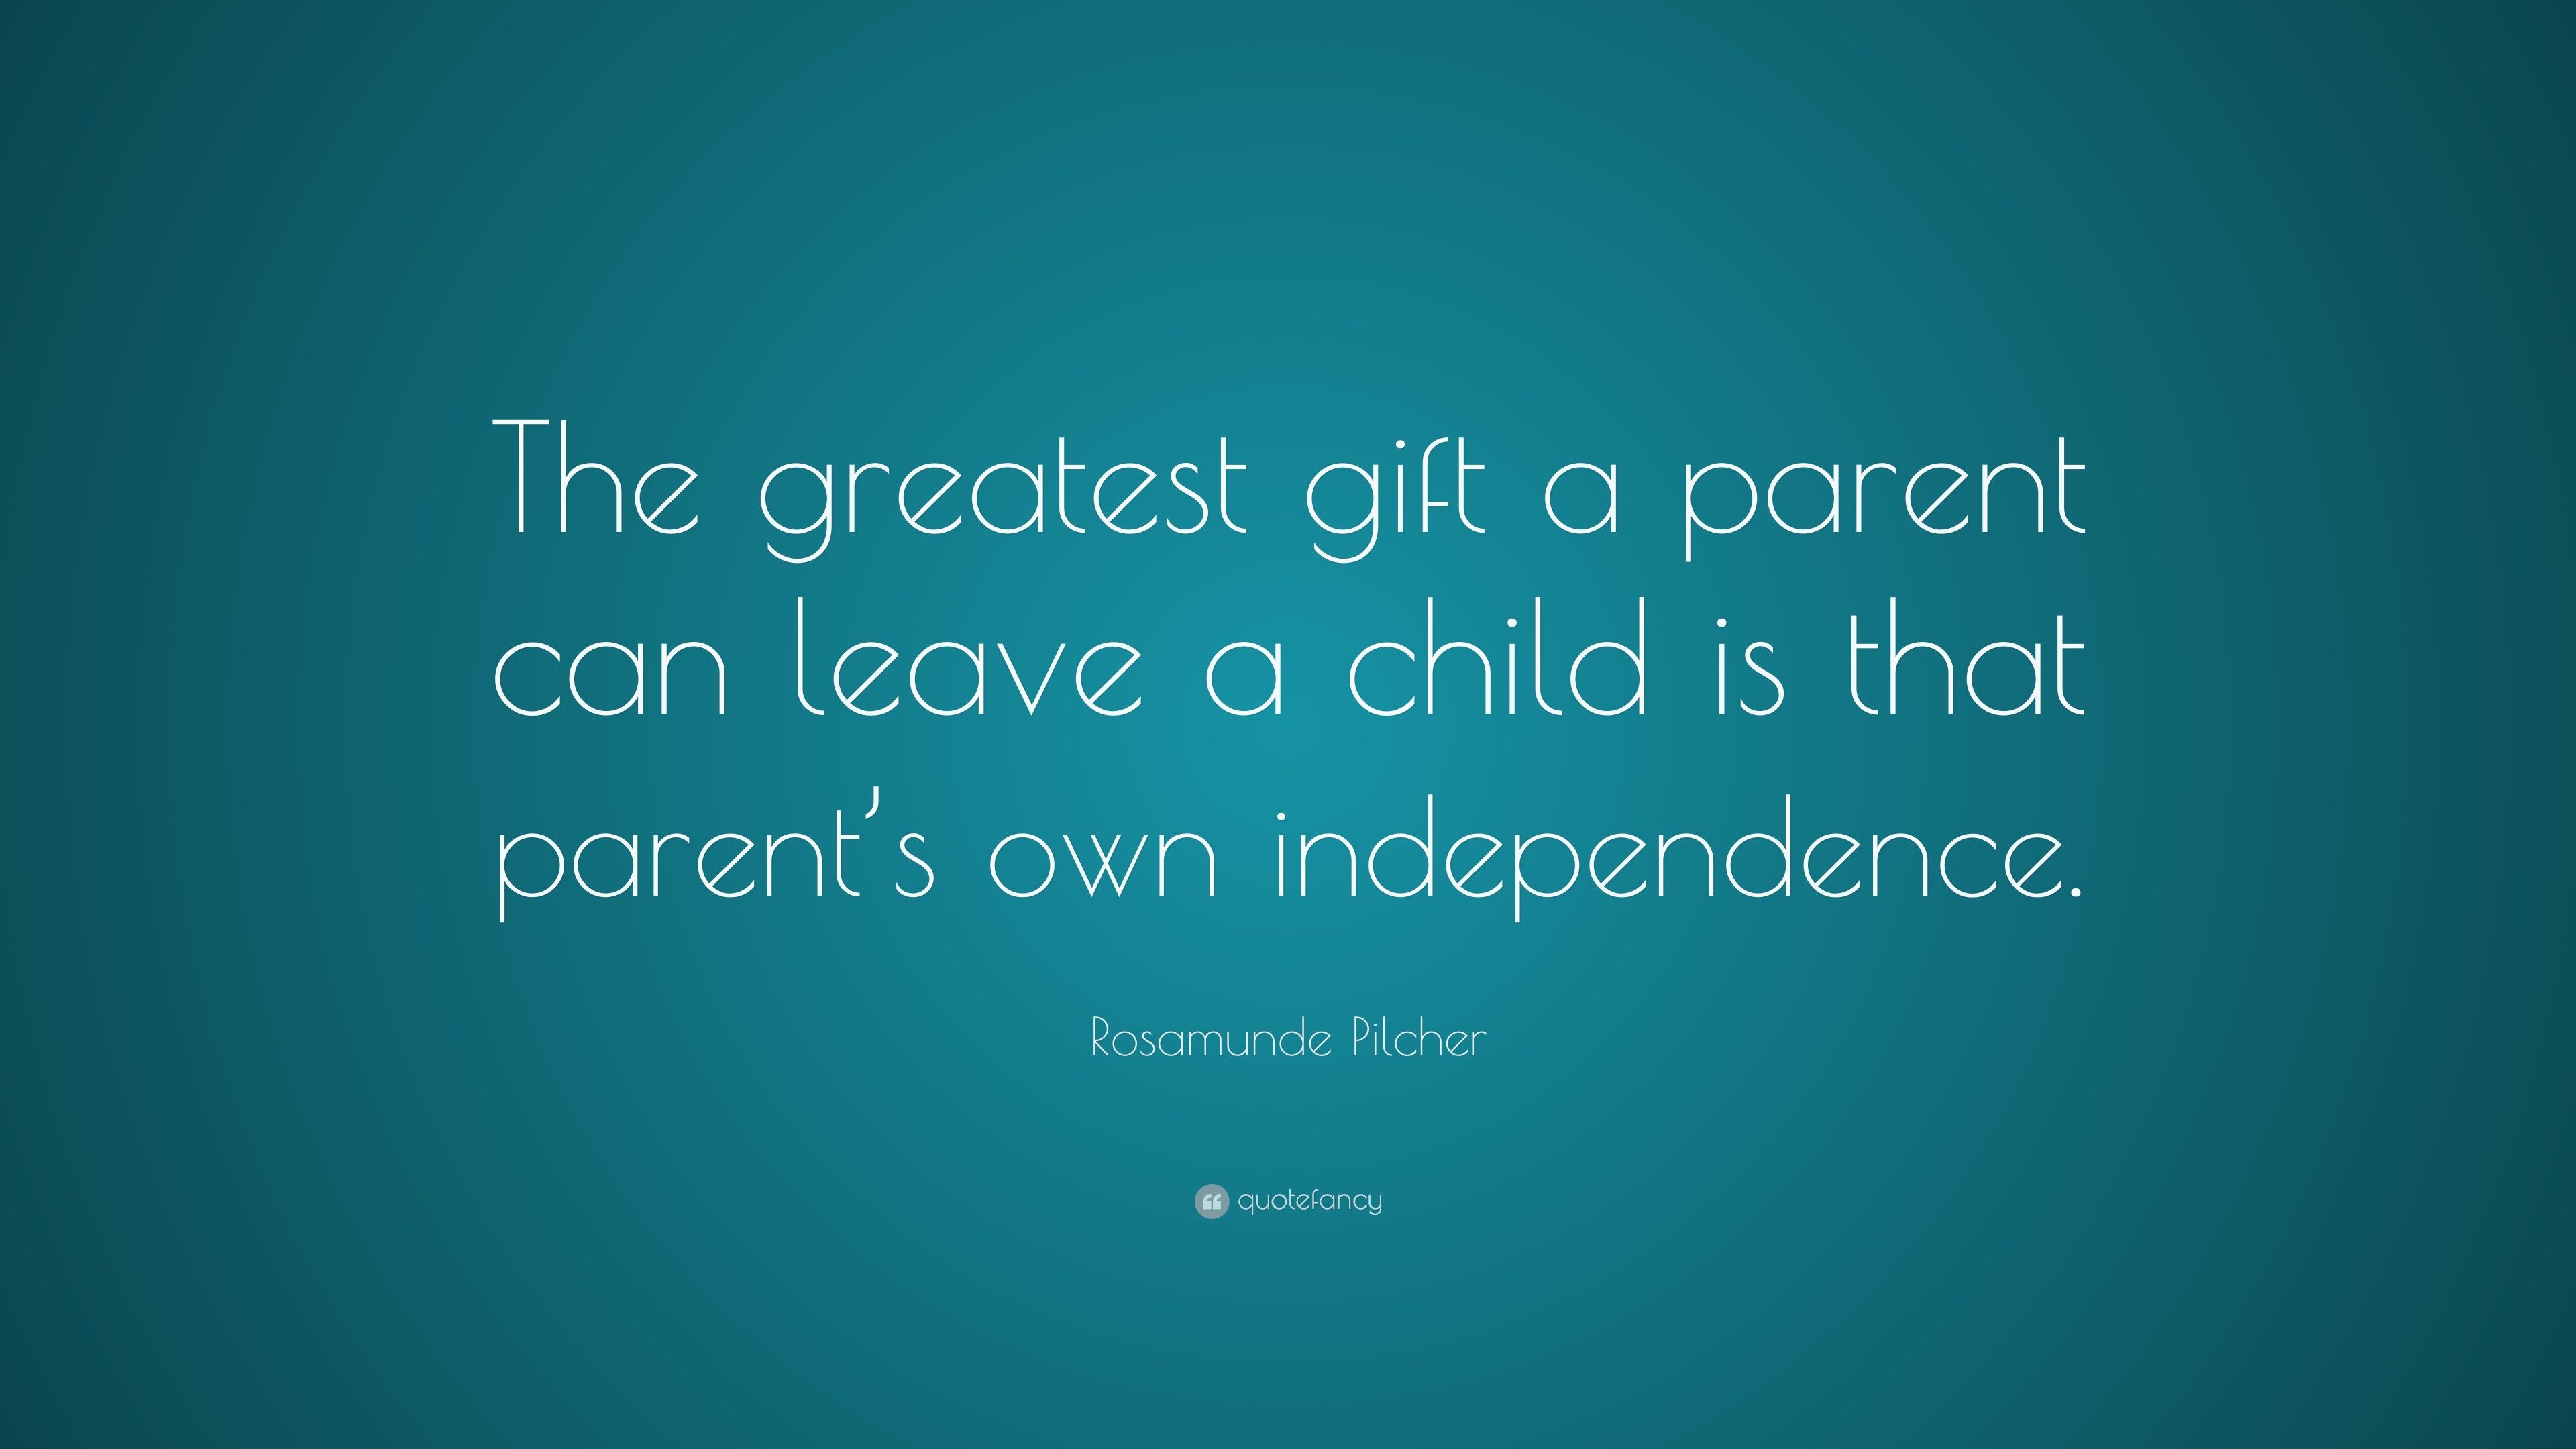 https://quotefancy.com/media/wallpaper/3840x2160/1393385-Rosamunde-Pilcher-Quote-The-greatest-gift-a-parent-can-leave-a.jpg